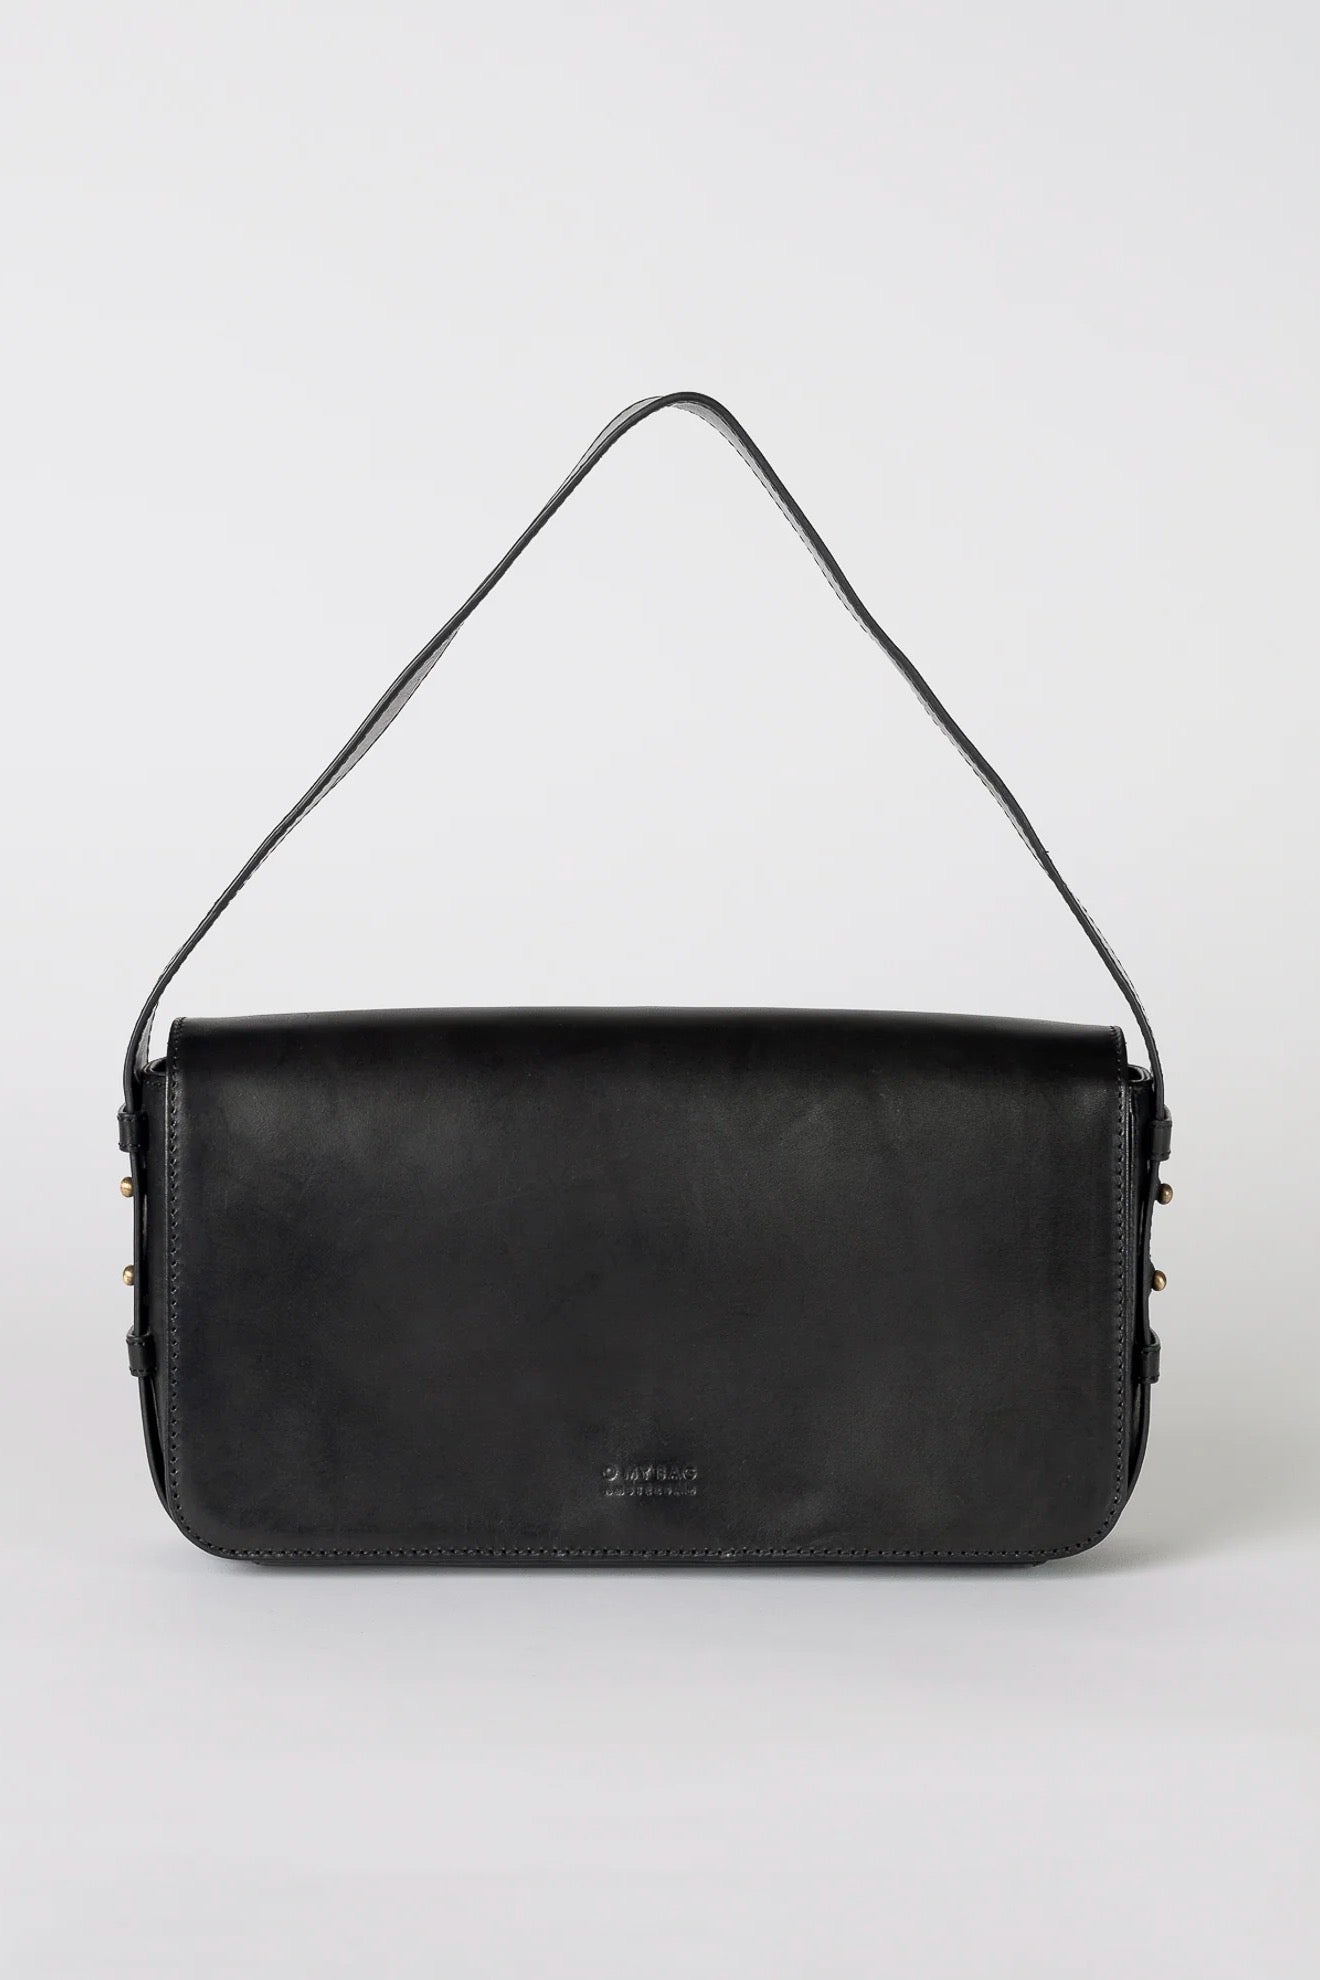 GINA BAGUETTE black classic leather